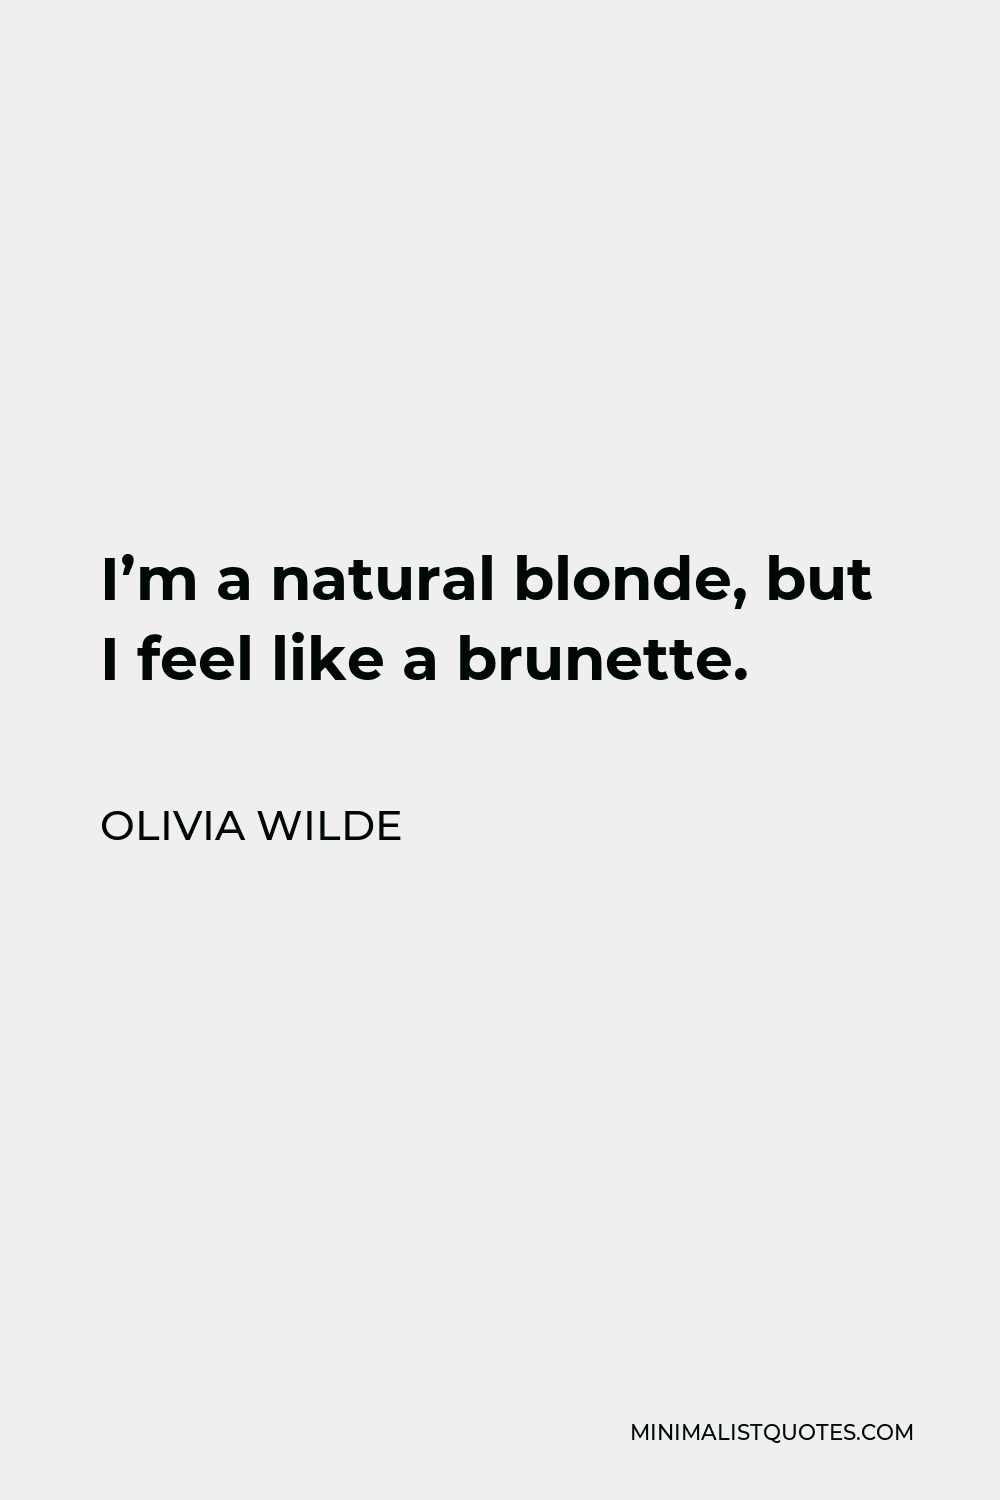 Olivia Wilde Quote - I’m a natural blonde, but I feel like a brunette. I feel like people treat me now how I should be treated. People used to be shocked, when I was blond, that I wasn’t stupid.